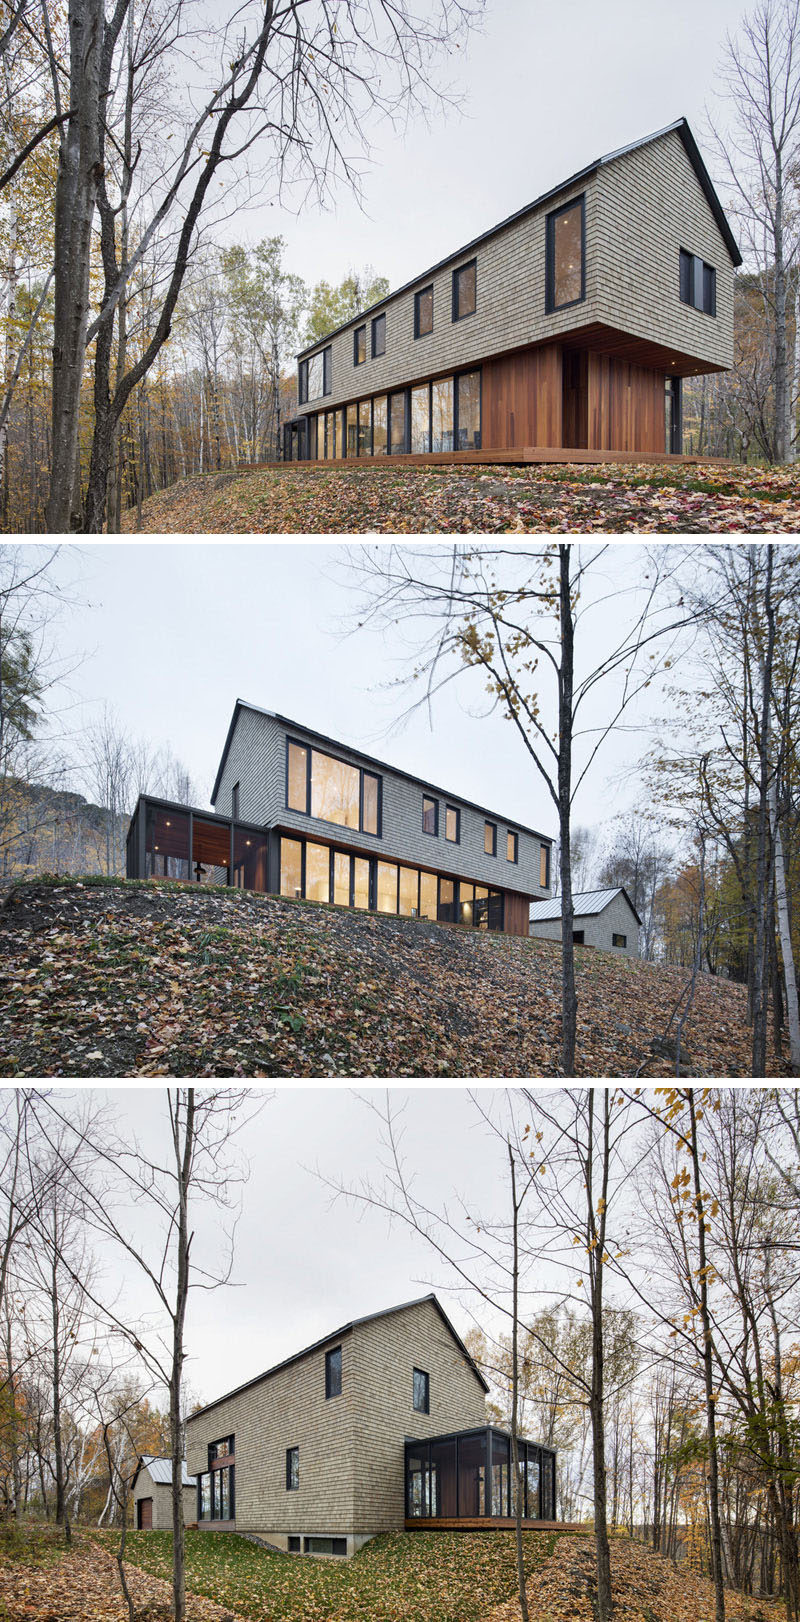 18 Modern House In The Forest // Wood shingles and wood paneling help this house fit right in with the forest surrounding it, while large windows provide views of the ever changing landscape.